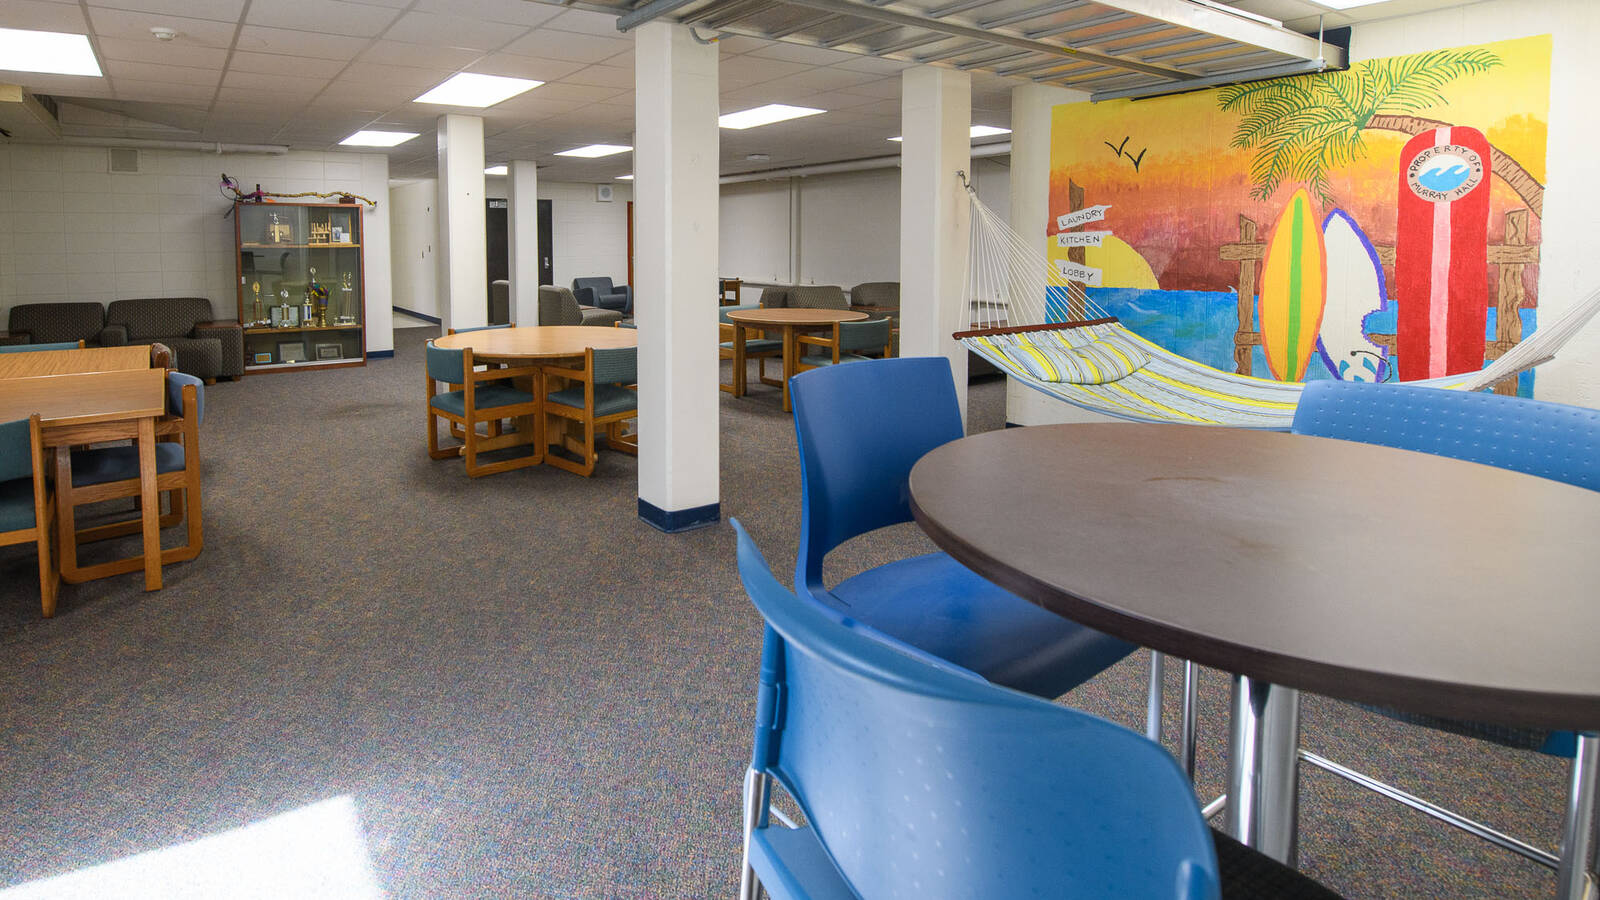 Lounge space in Murry Hall with tables and chairs and a mural on the wall.